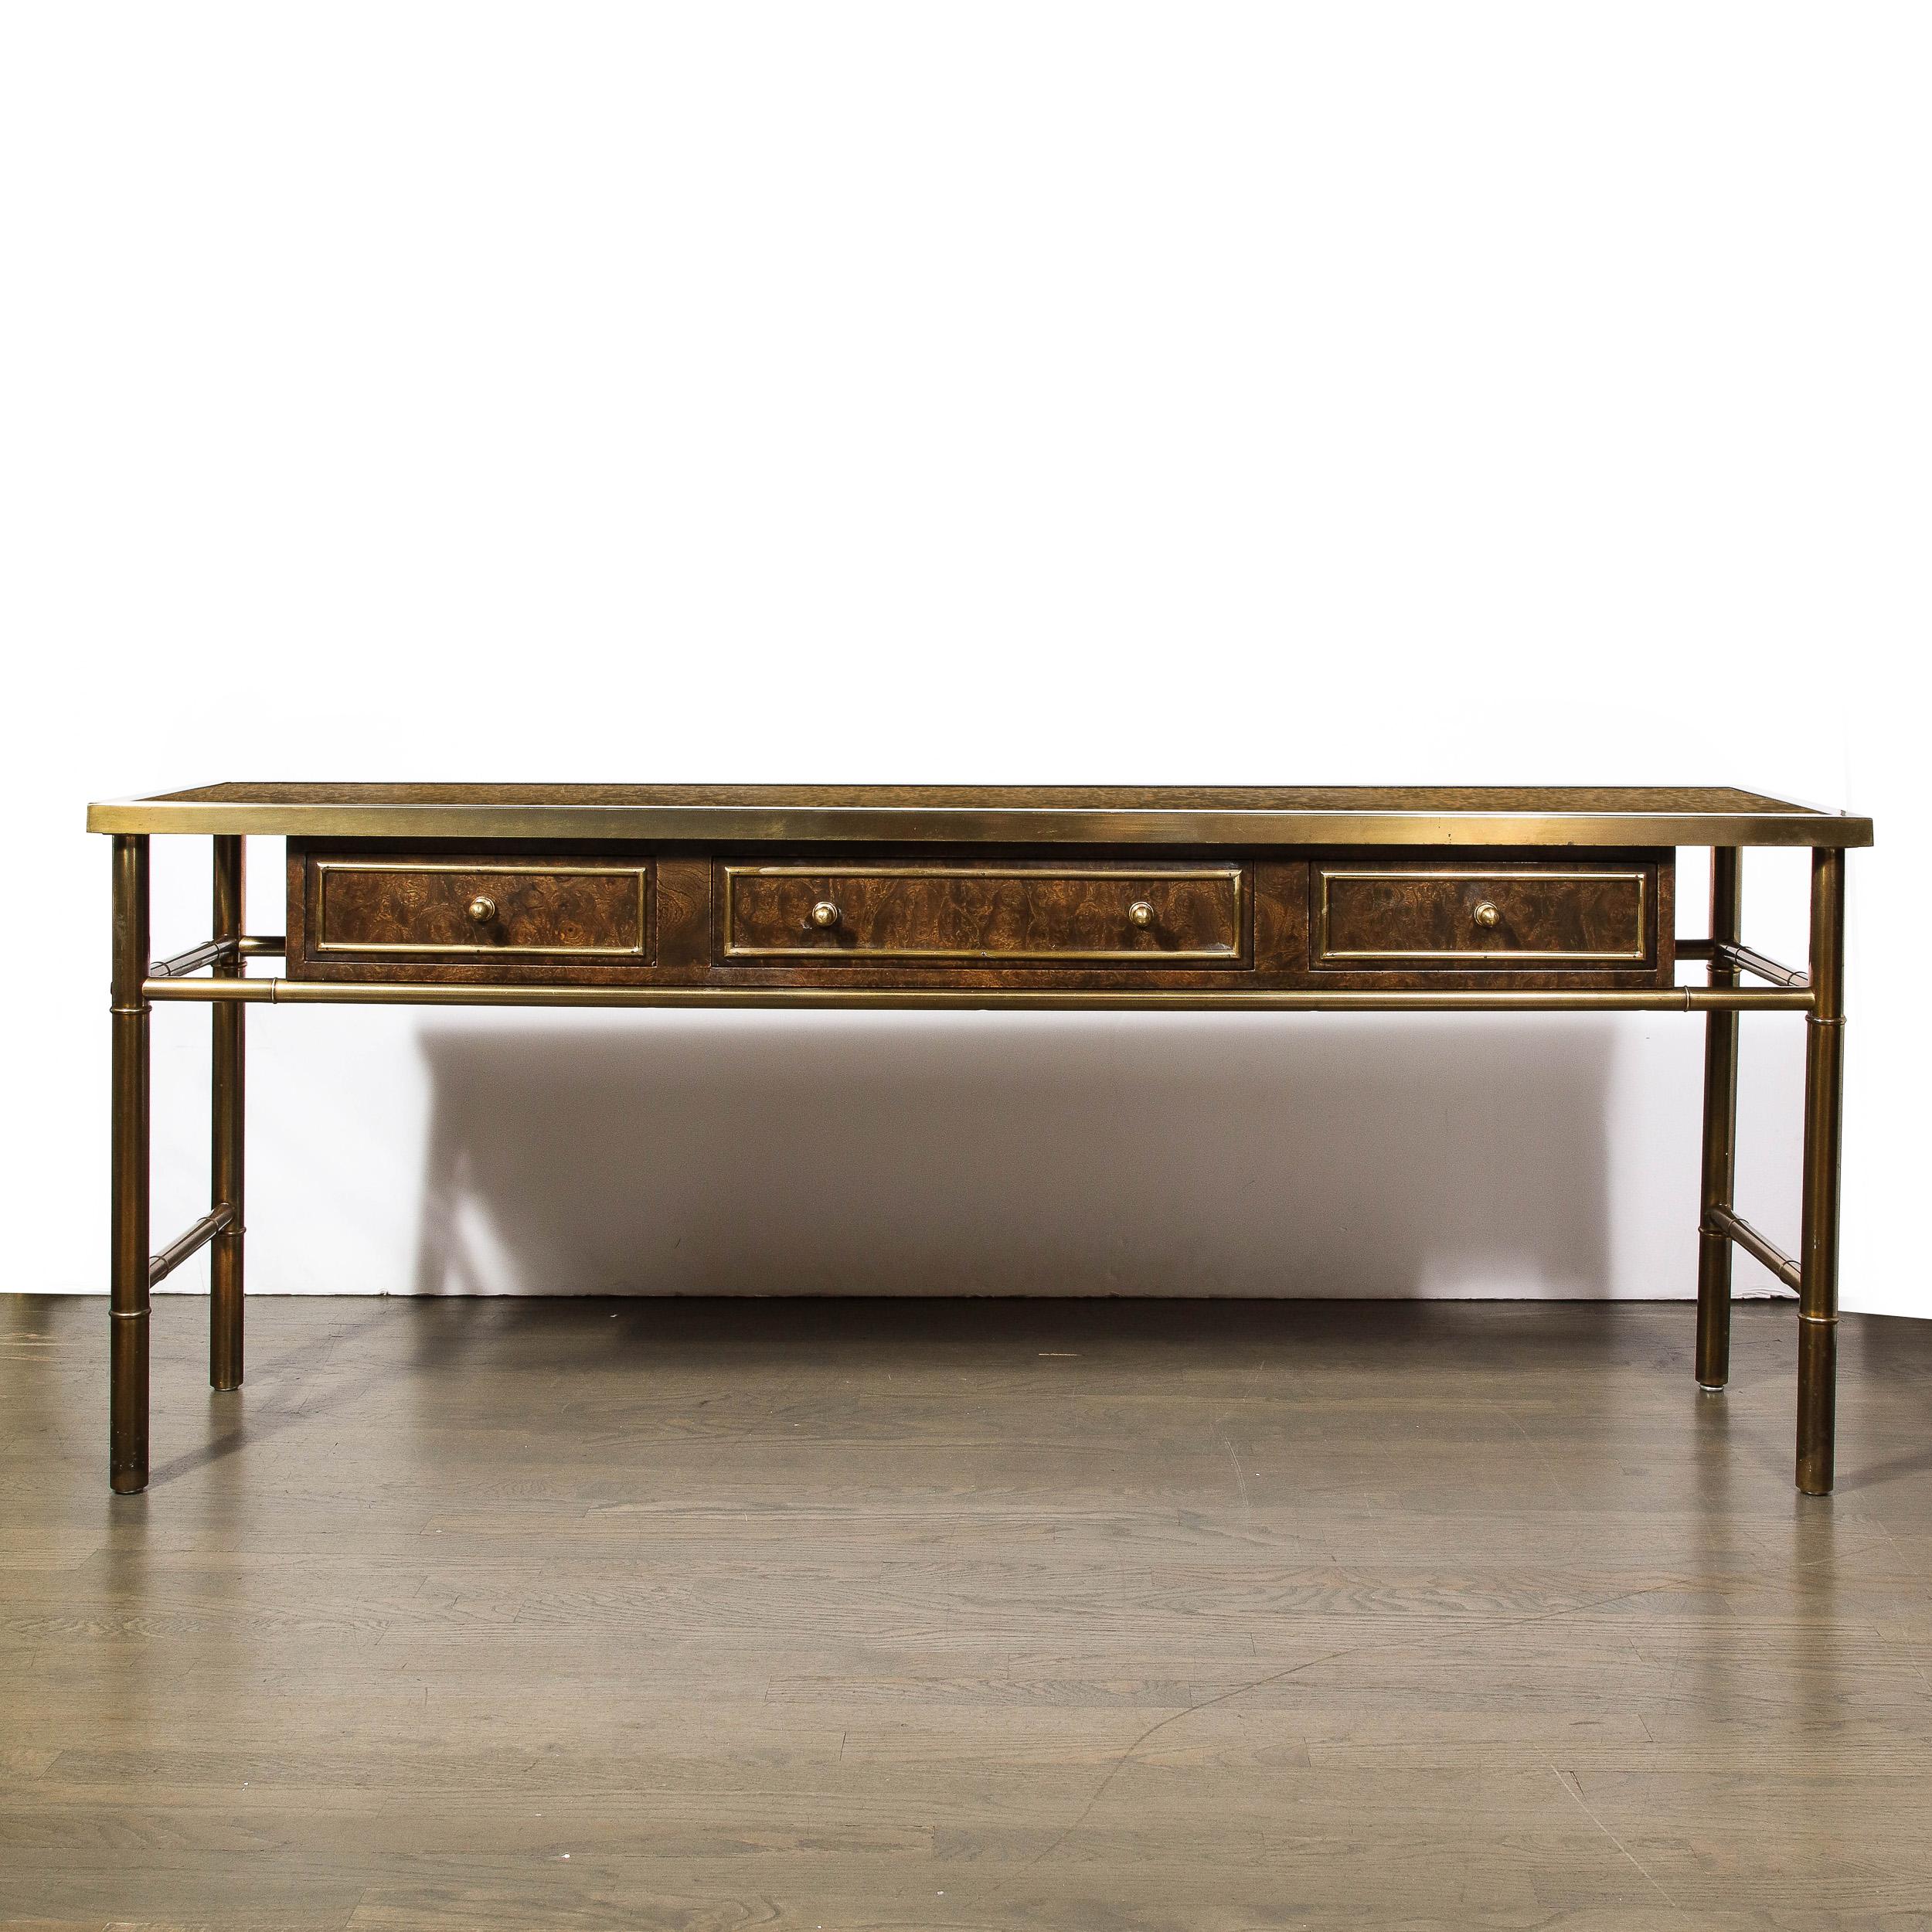 -This lovely and materially dynamic Mid-Century Modernist Console table in Brass and Burled Carpathian Elm is created by the company Mastercraft and originates from the United States, Circa 1970. A beautiful example of balanced material choices, the